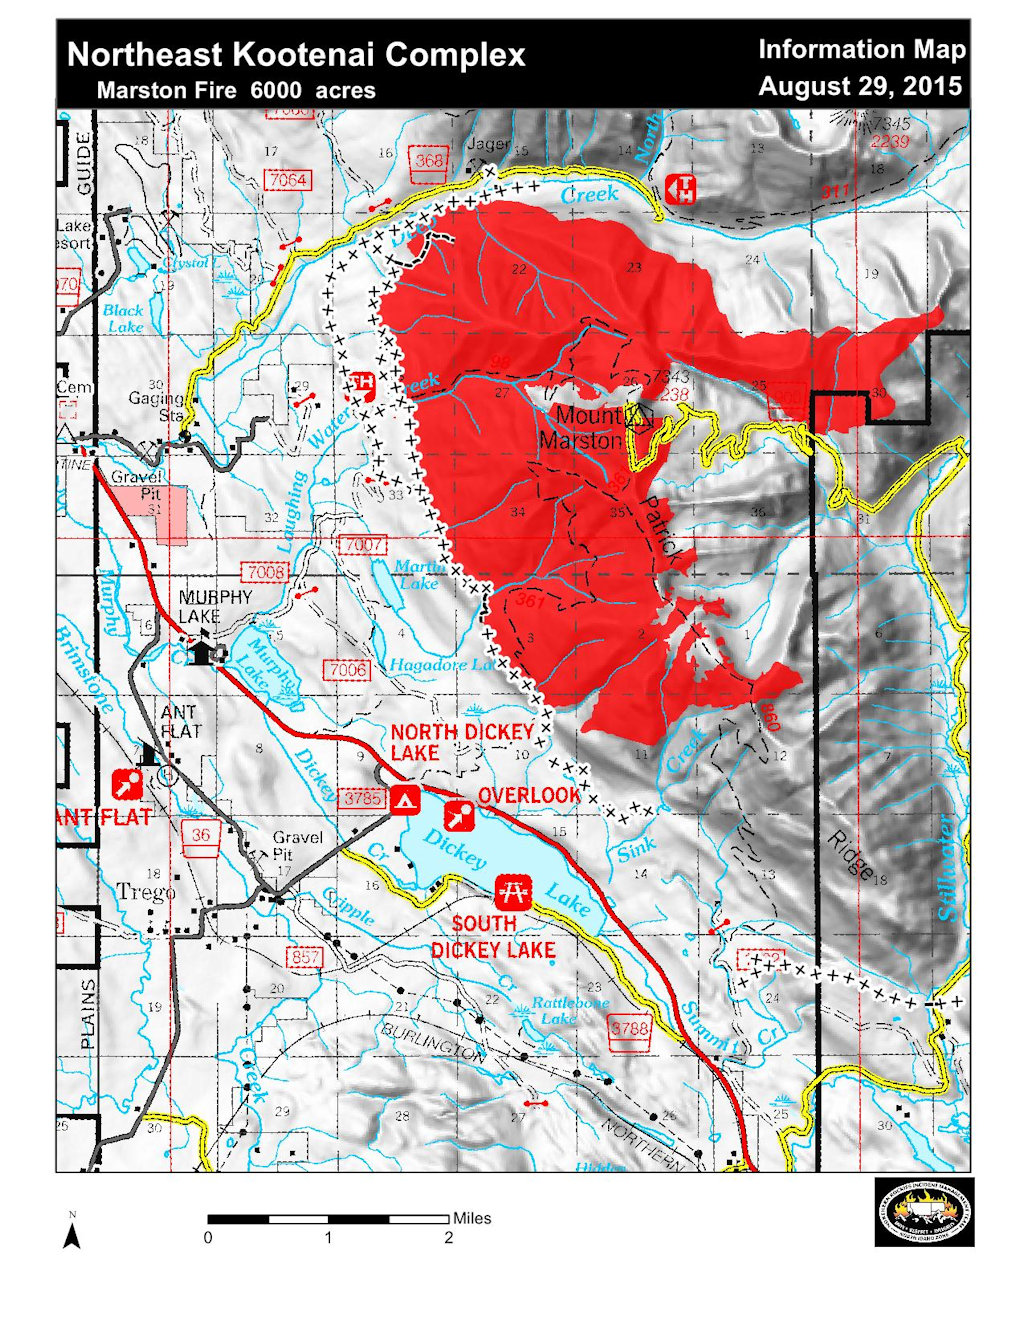 Marston Fire Information Map, Aug 29, 2015